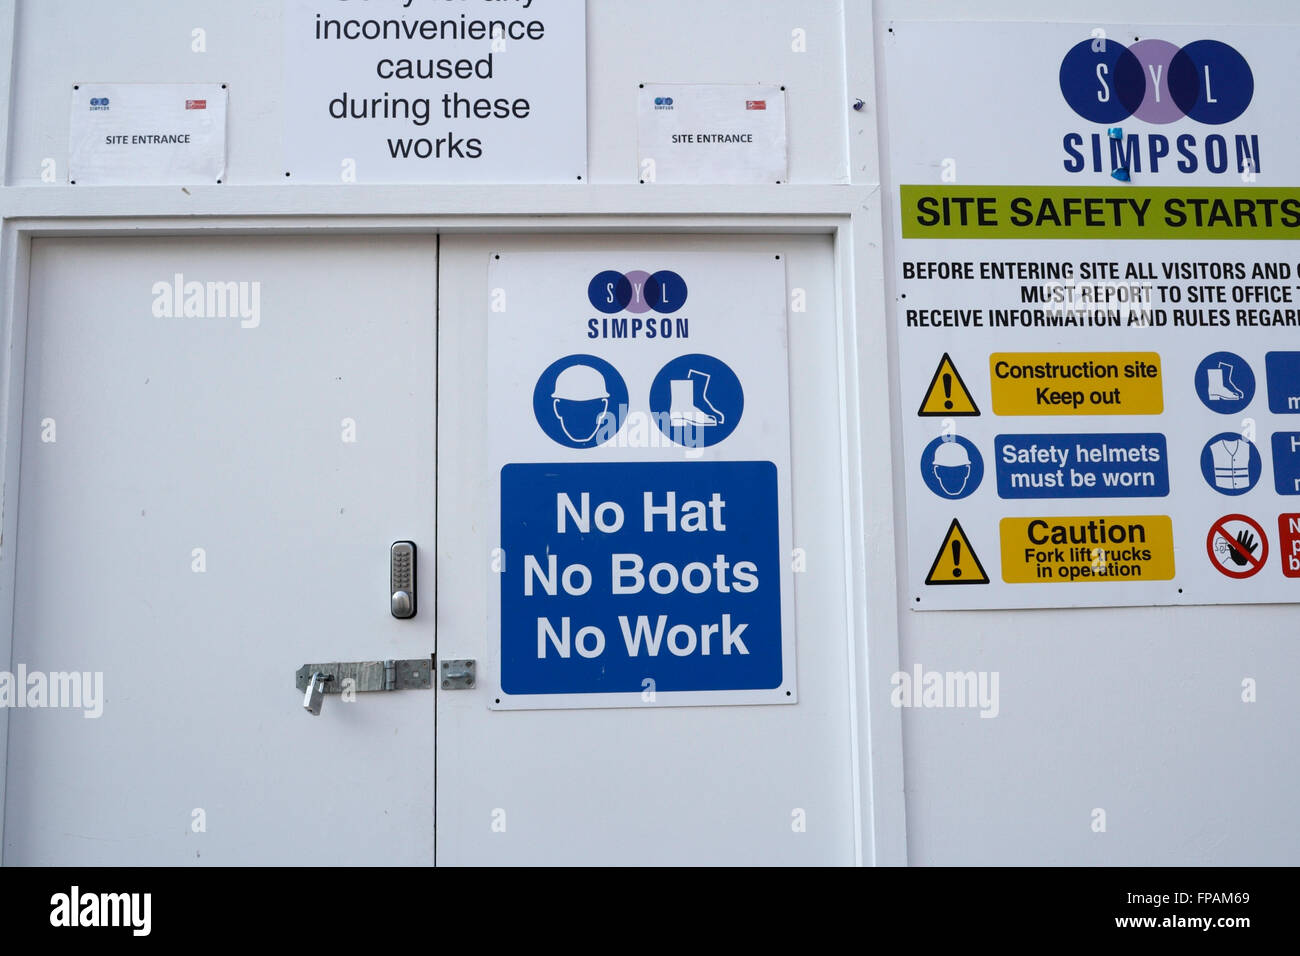 Works site entrance safety notice Stock Photo